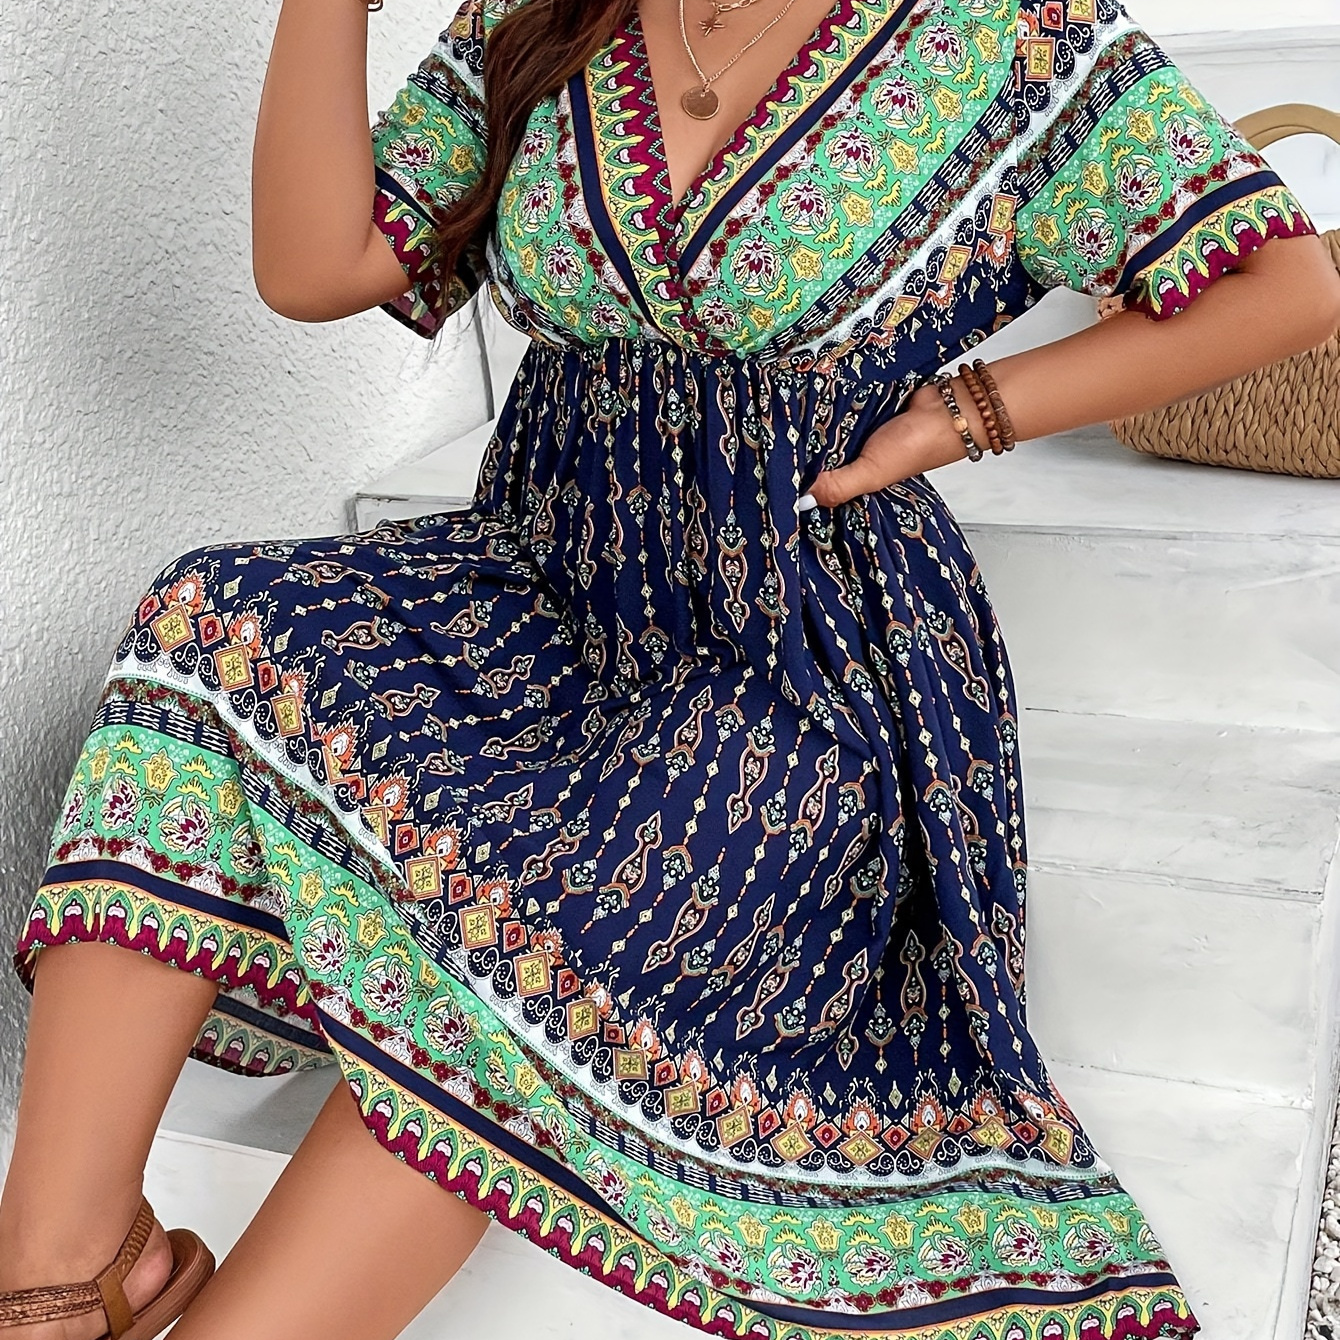 

Plus Size Floral Print Cinched Waist Dress, Casual Short Sleeve Dress For Spring & Summer, Women's Plus Size Clothing